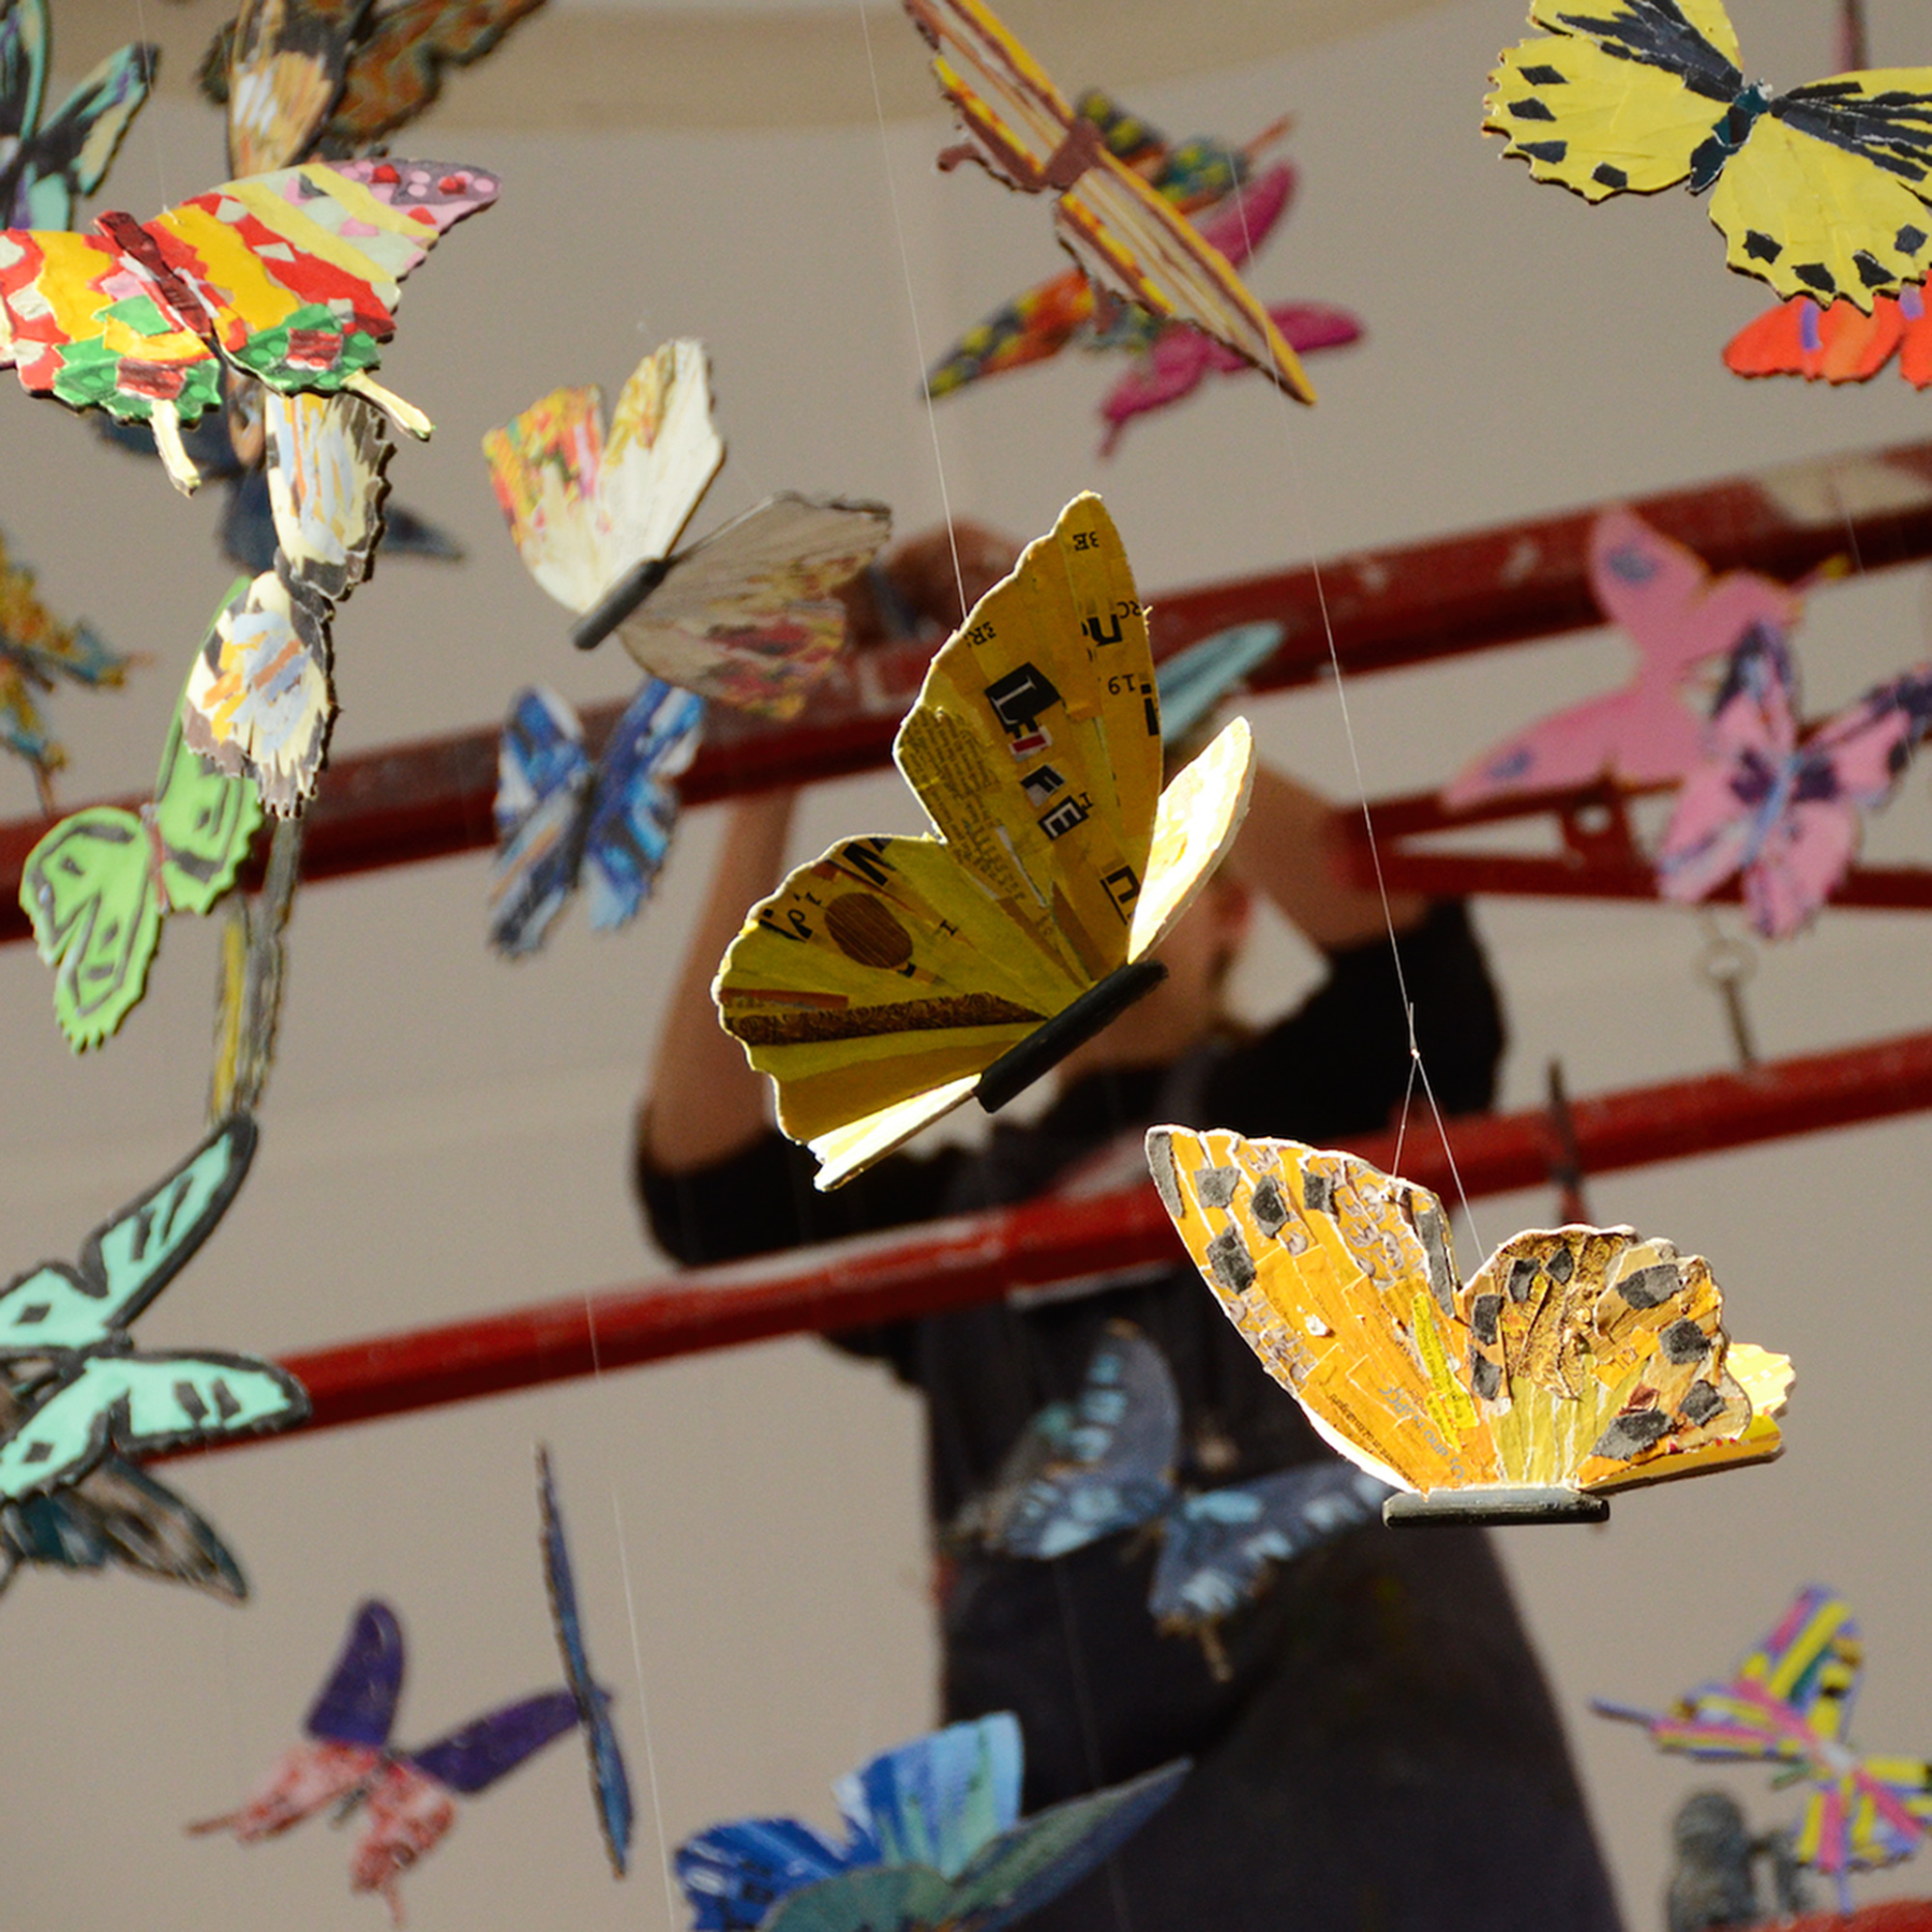 installing colourful butterfly display